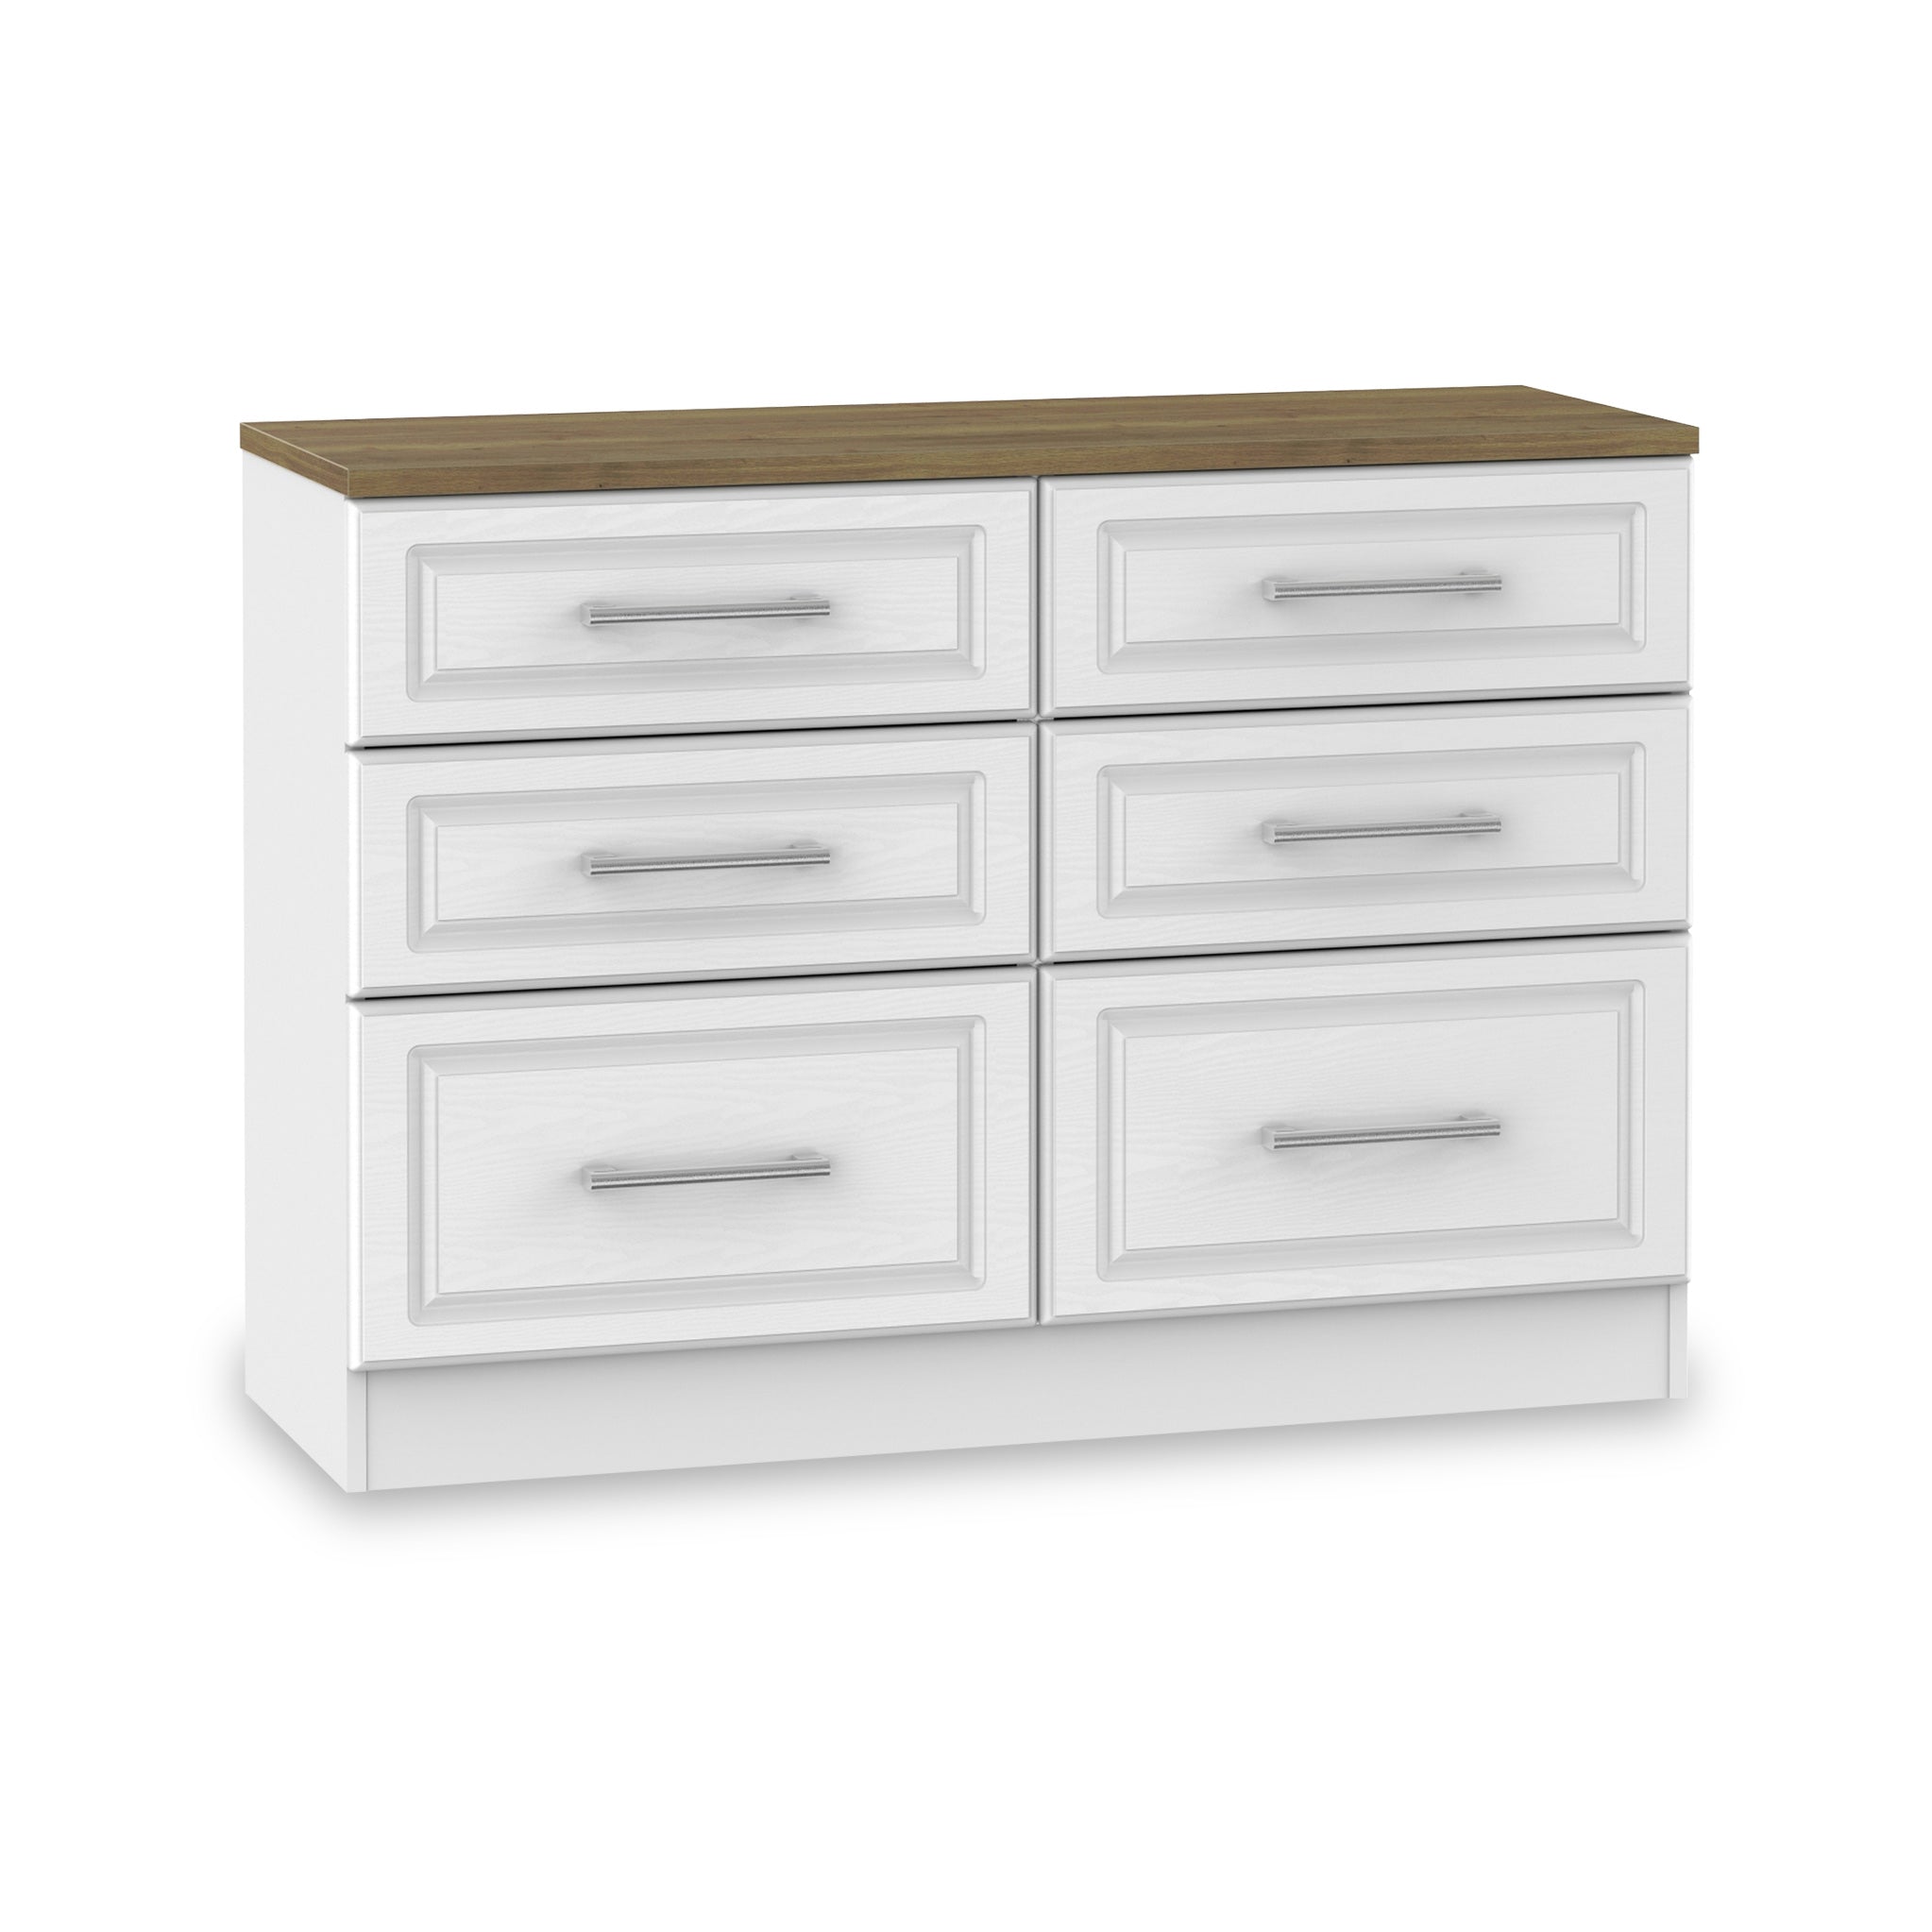 Talland 6 Drawer Wide Chest Of Drawers